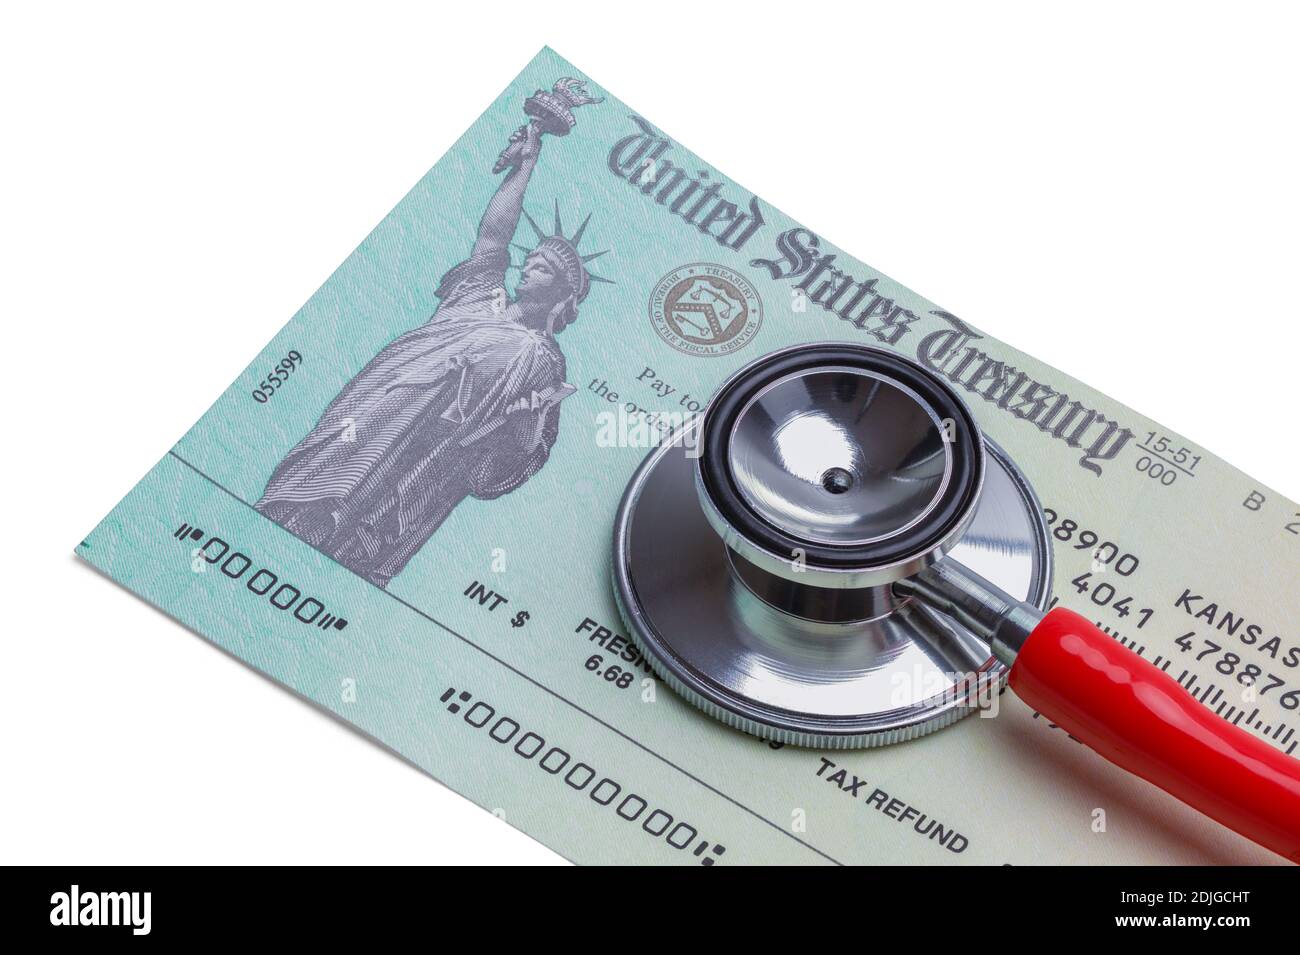 Tax Return Check with Red Stethoscope. Stock Photo